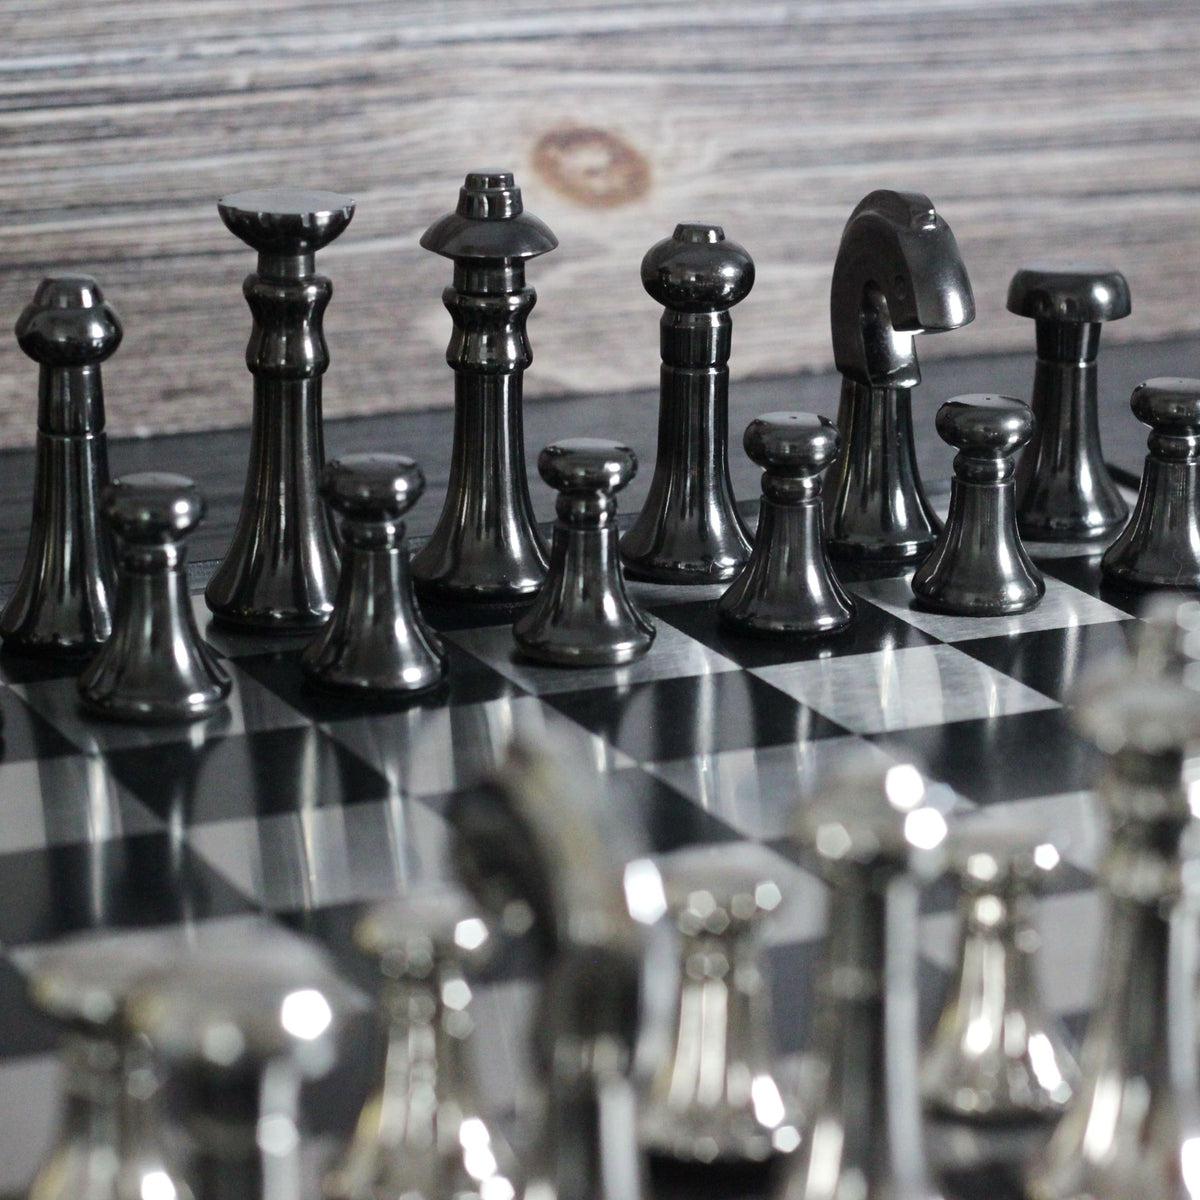 The Modern Defense - Black and Silver Metallic Chess Set - Marble Cultures